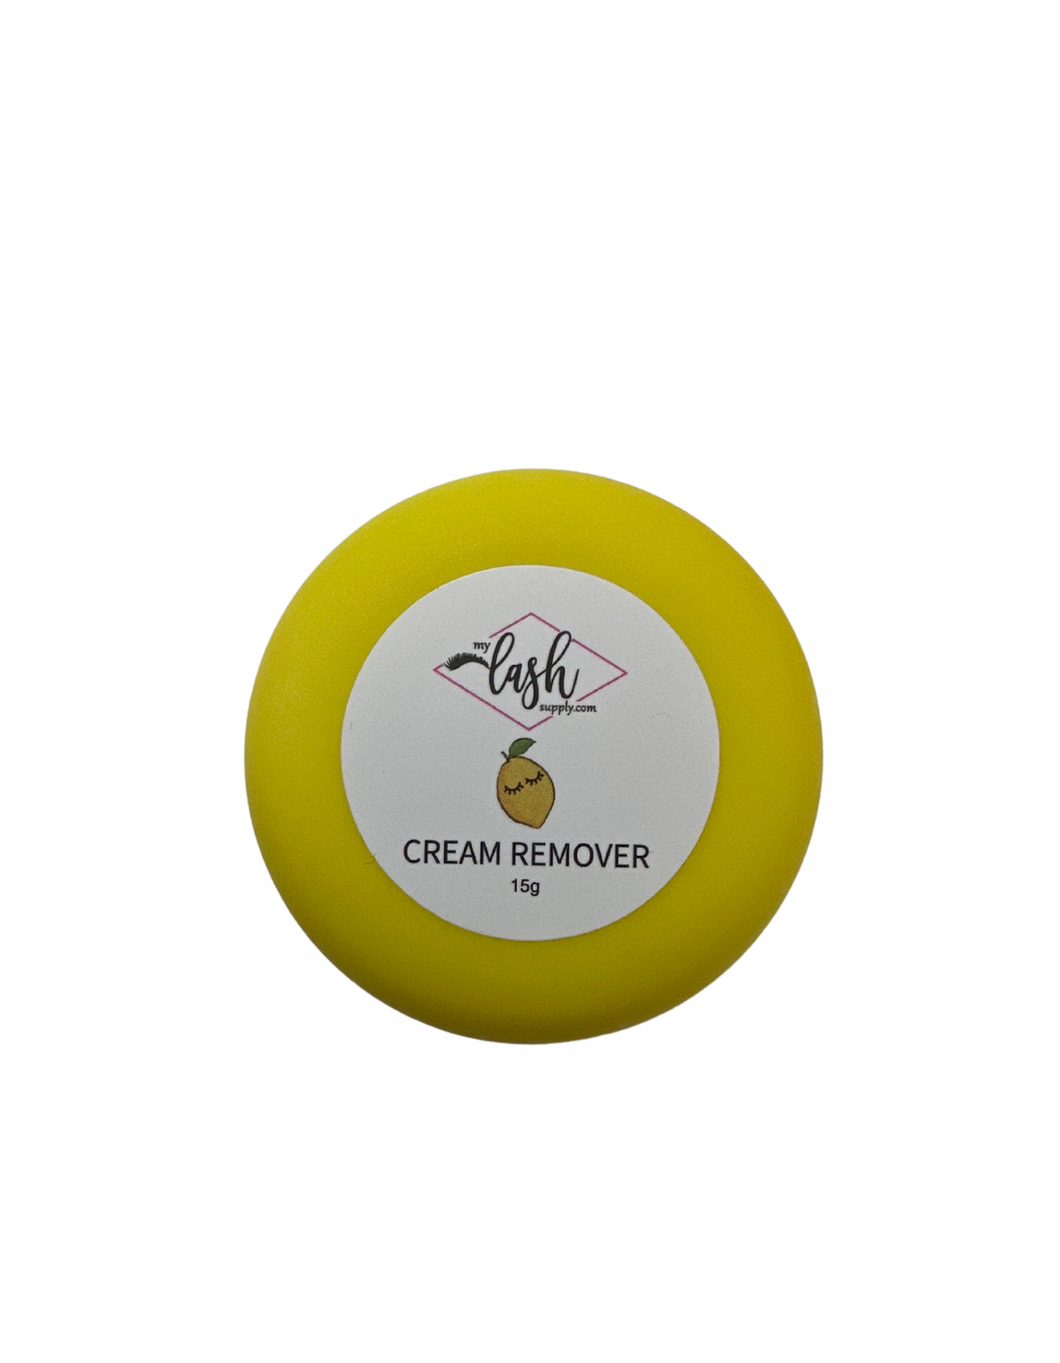 Macaron Scented Remover